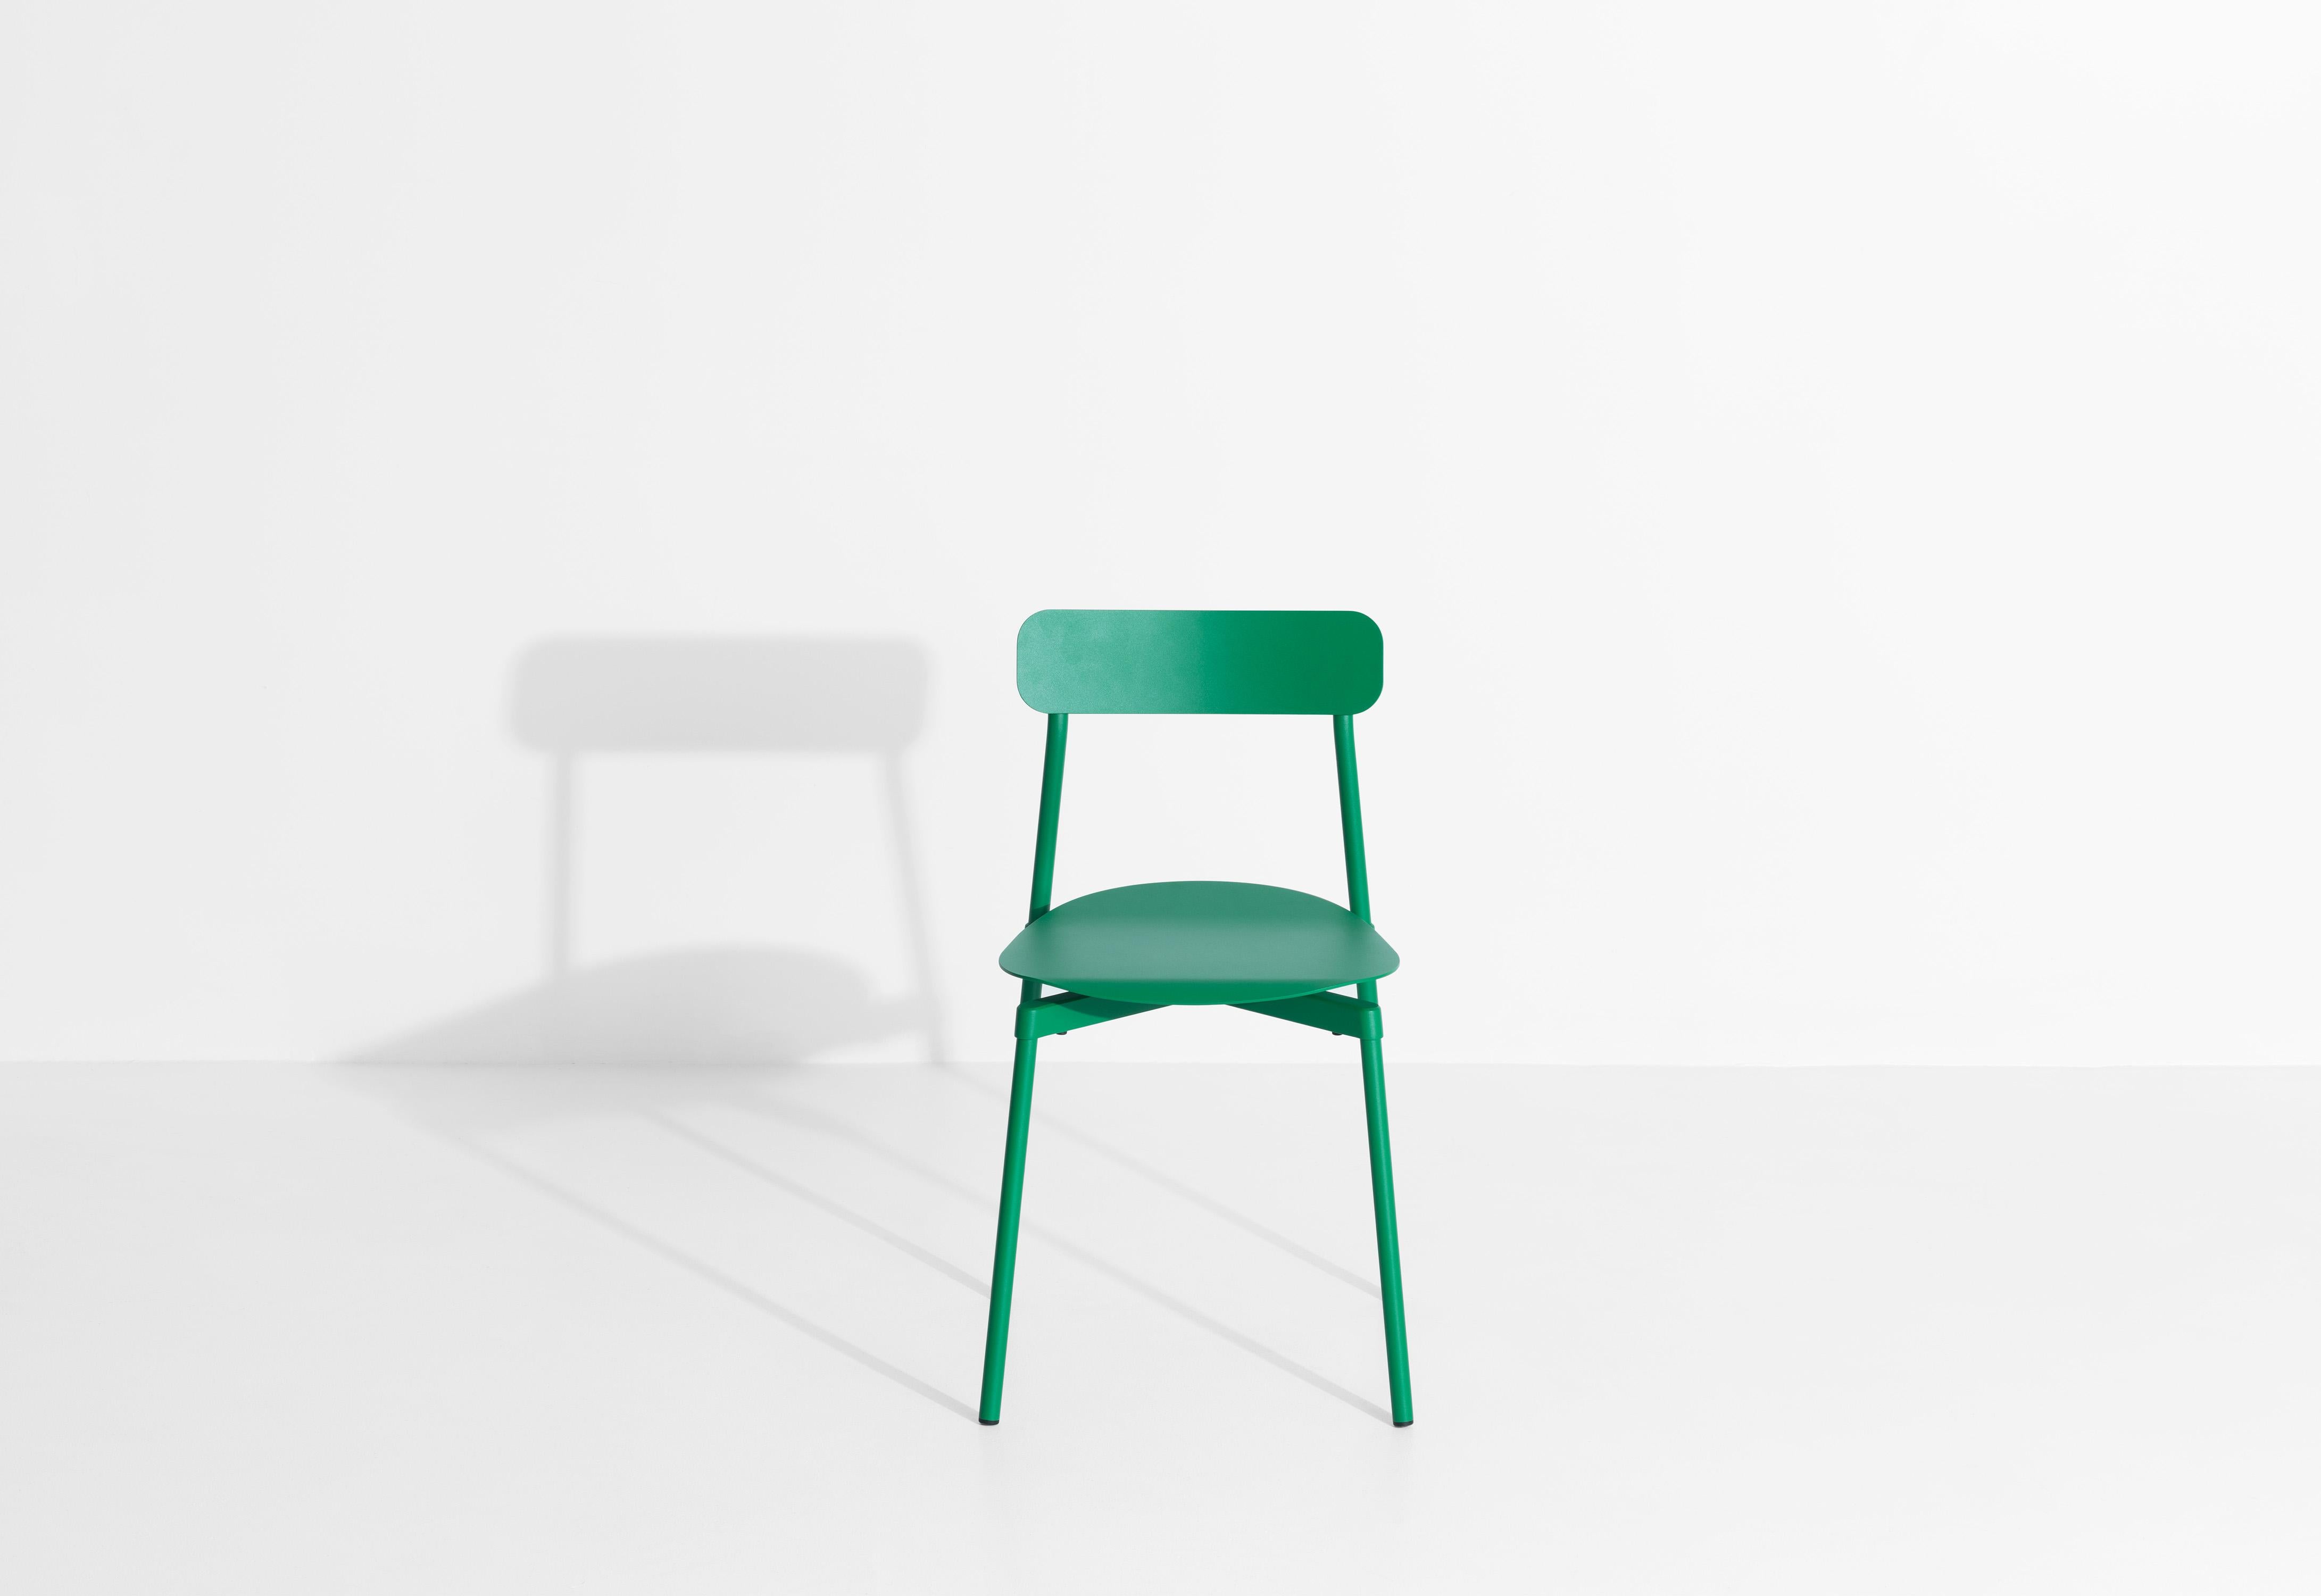 Chinese Petite Friture Fromme Chair in Mint-Green Aluminium by Tom Chung, 2019 For Sale